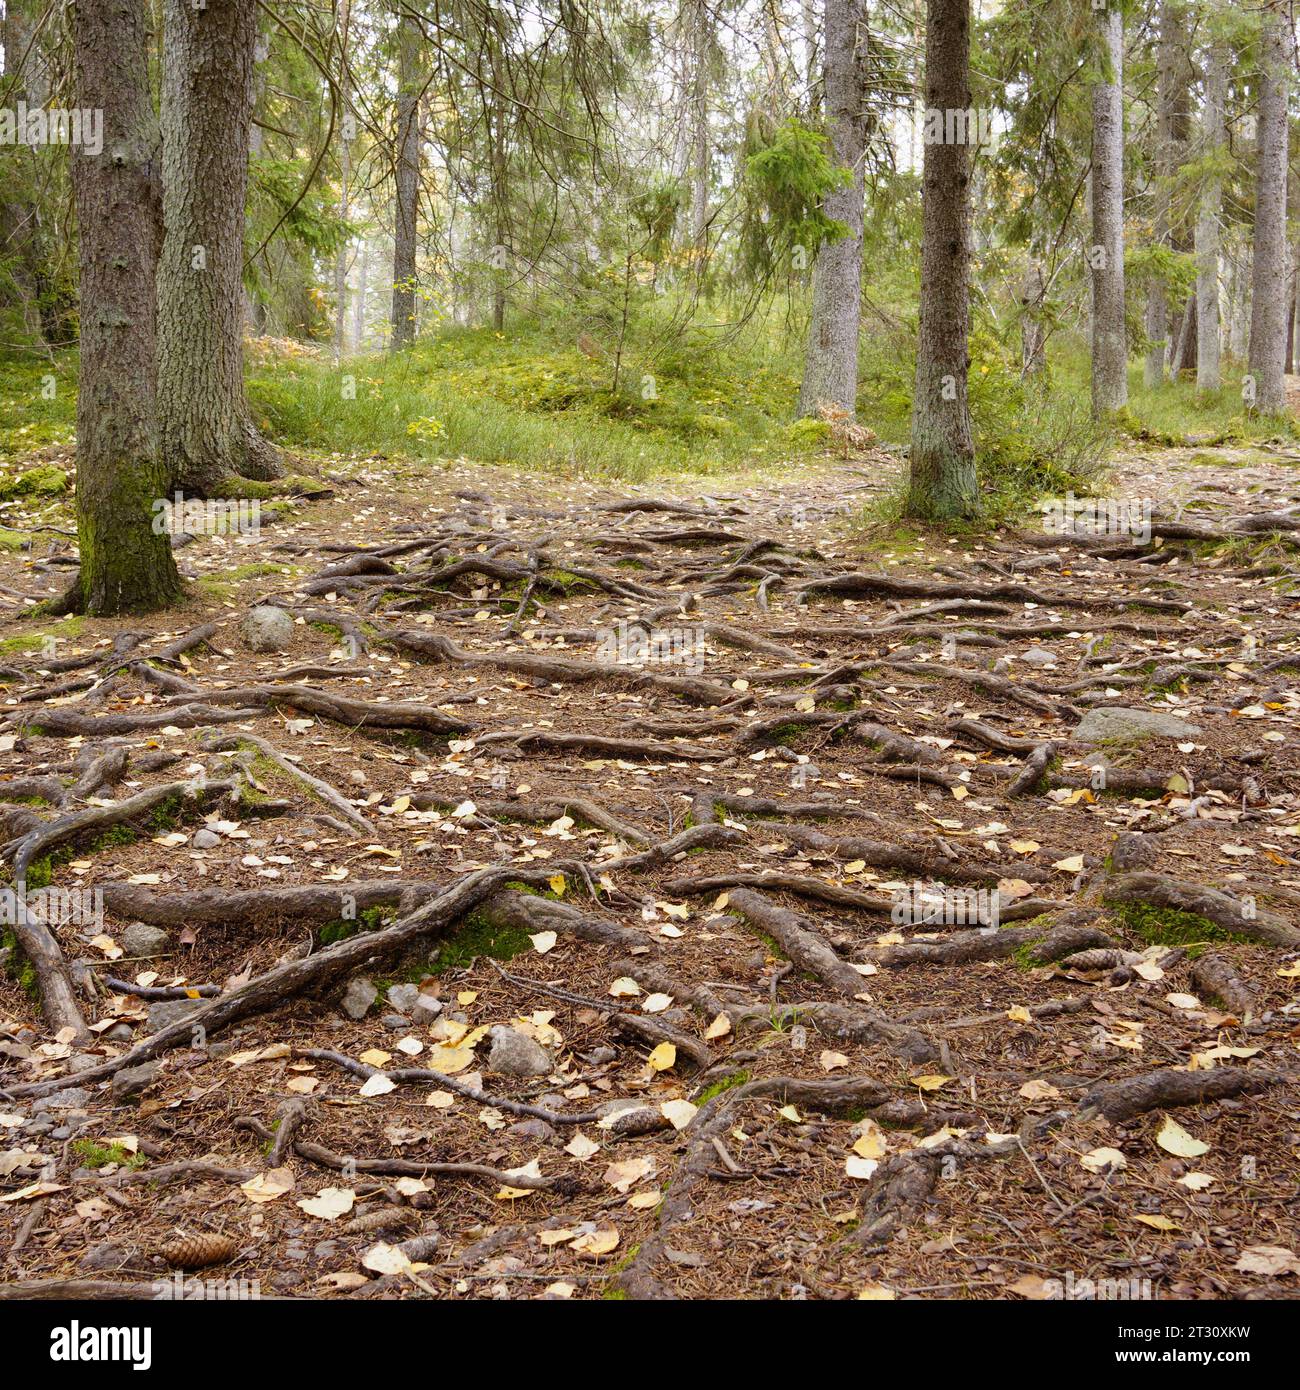 Wooden path through a forest Stock Photo